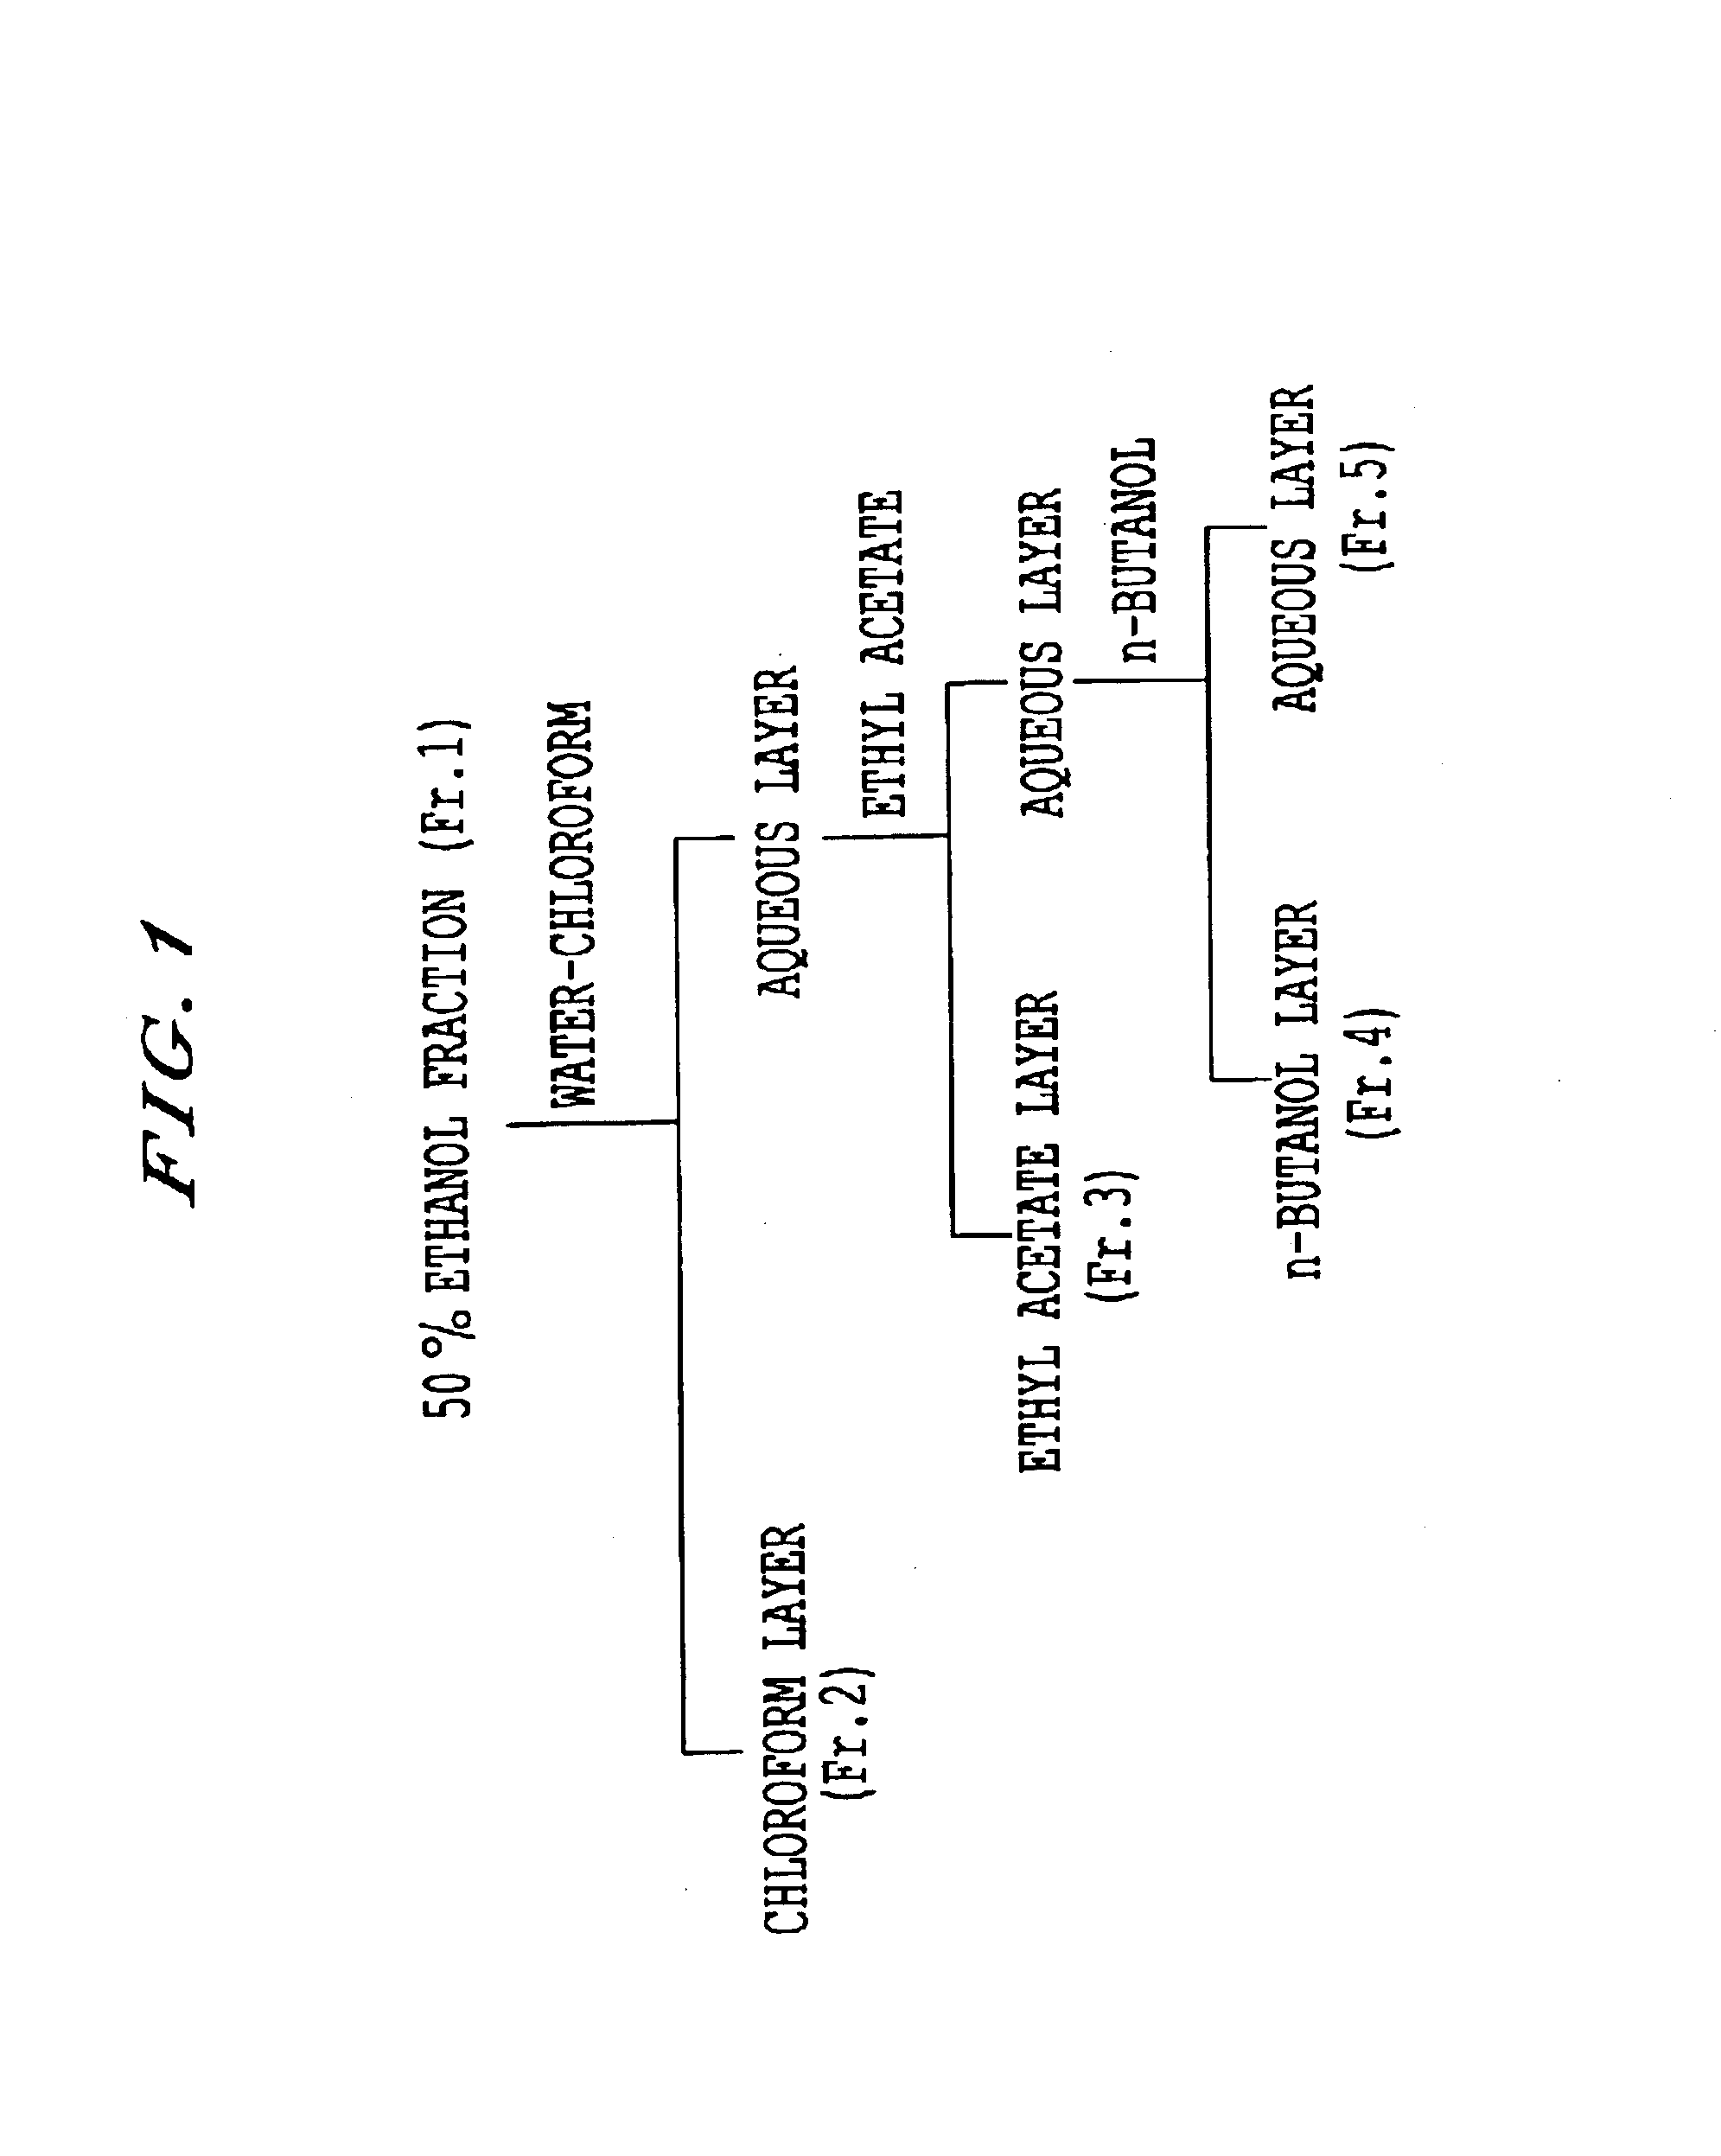 Method for treating an allergic or inflammatory disease